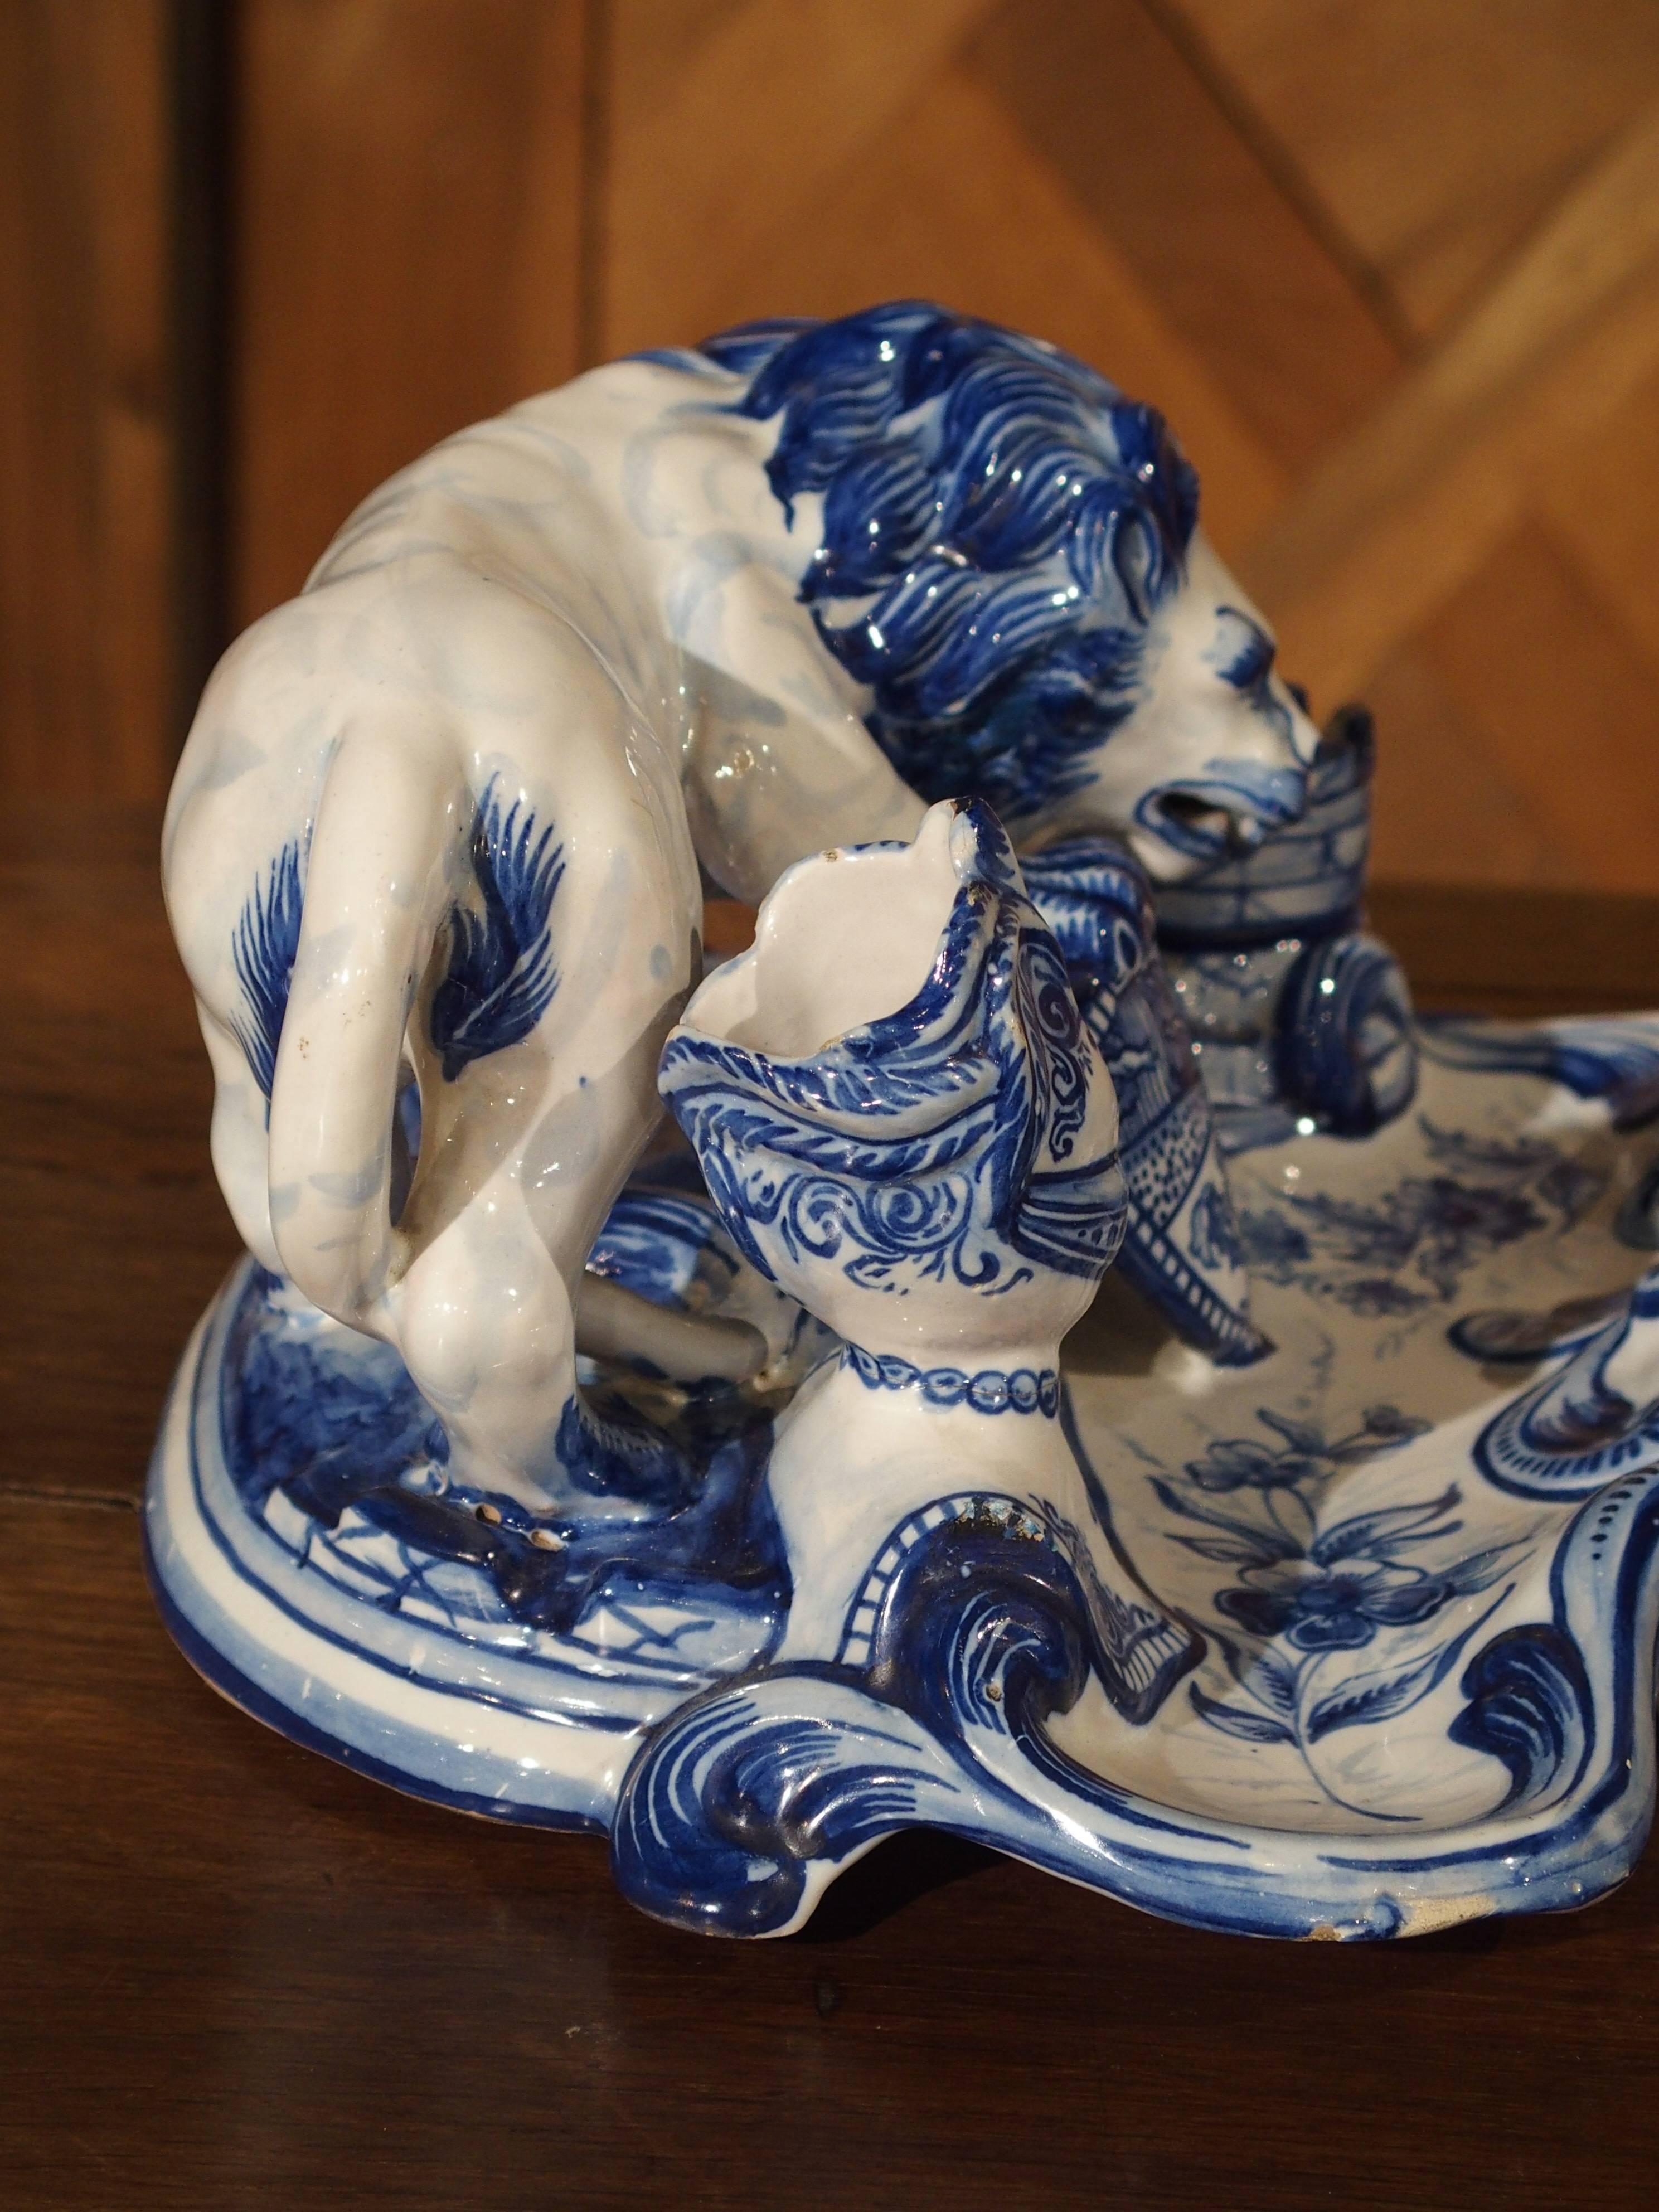 This cobalt blue on white ground, French faience heraldic inkwell dates to the early 1900s. It is after Emile Galle and the designer, Gengoult Prouve who had designed similar candle holders and inkwells in France during the late 1800s. The lion’s